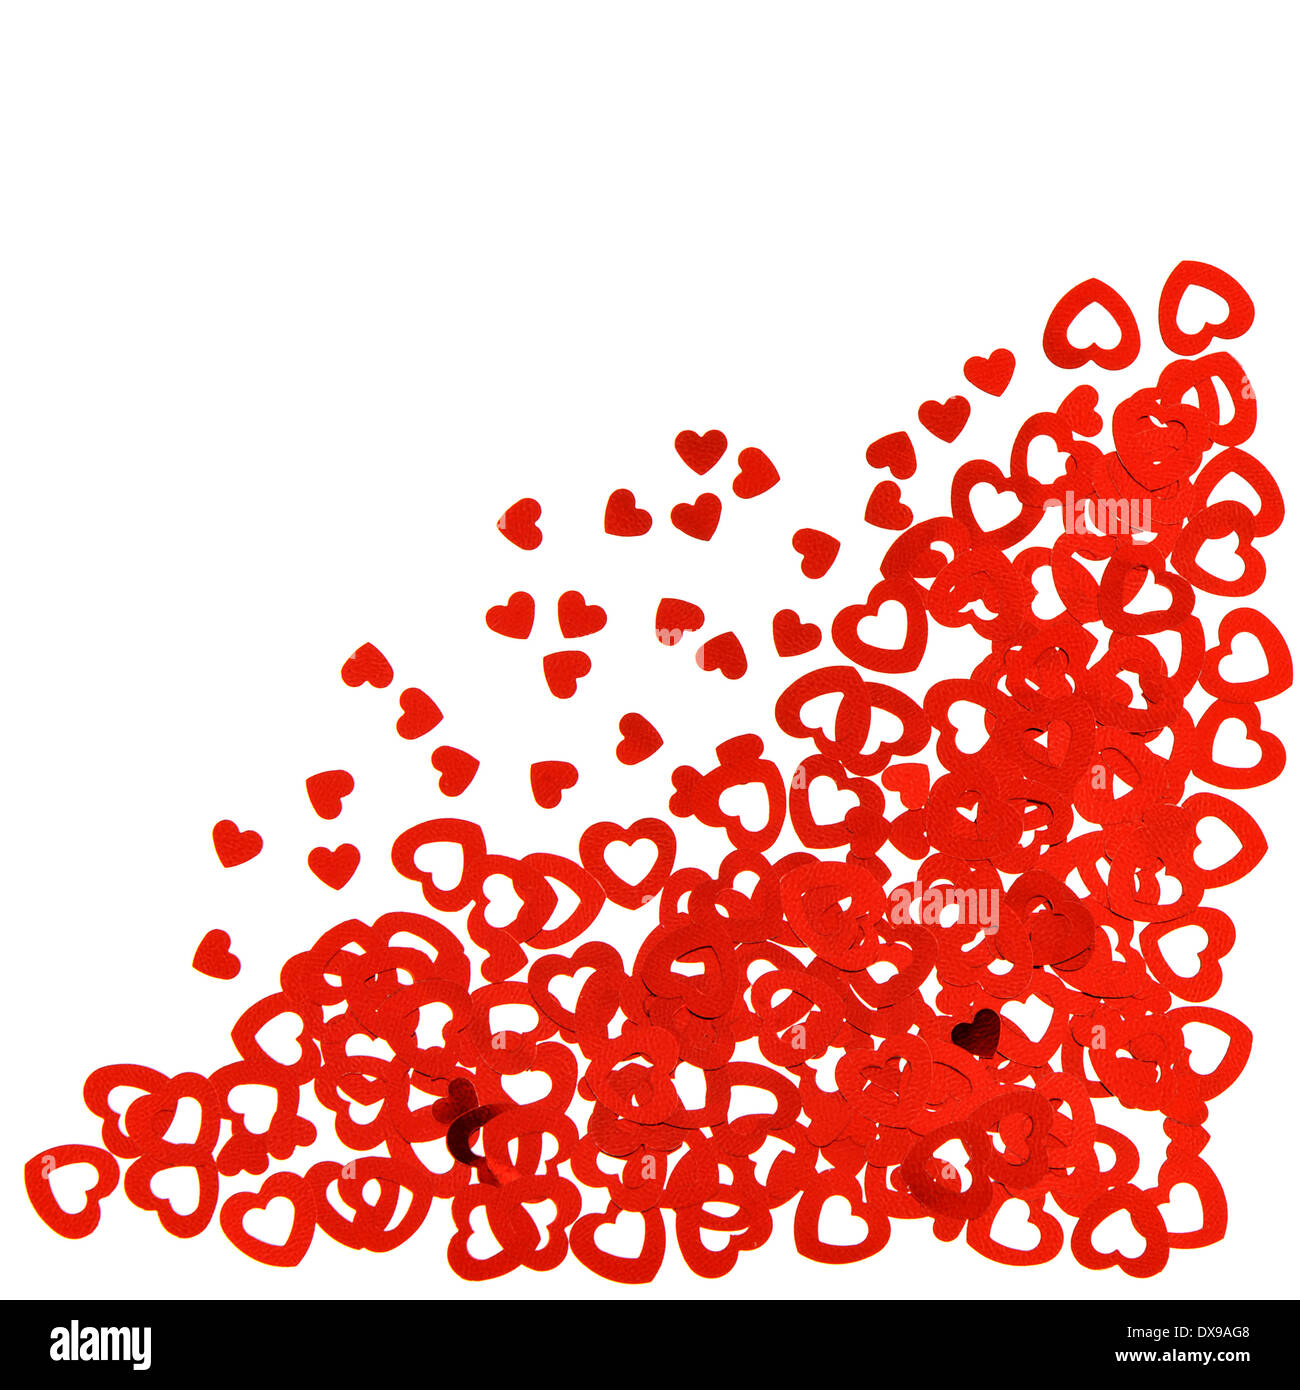 background from red heart shaped confetti. festive decoration Stock Photo